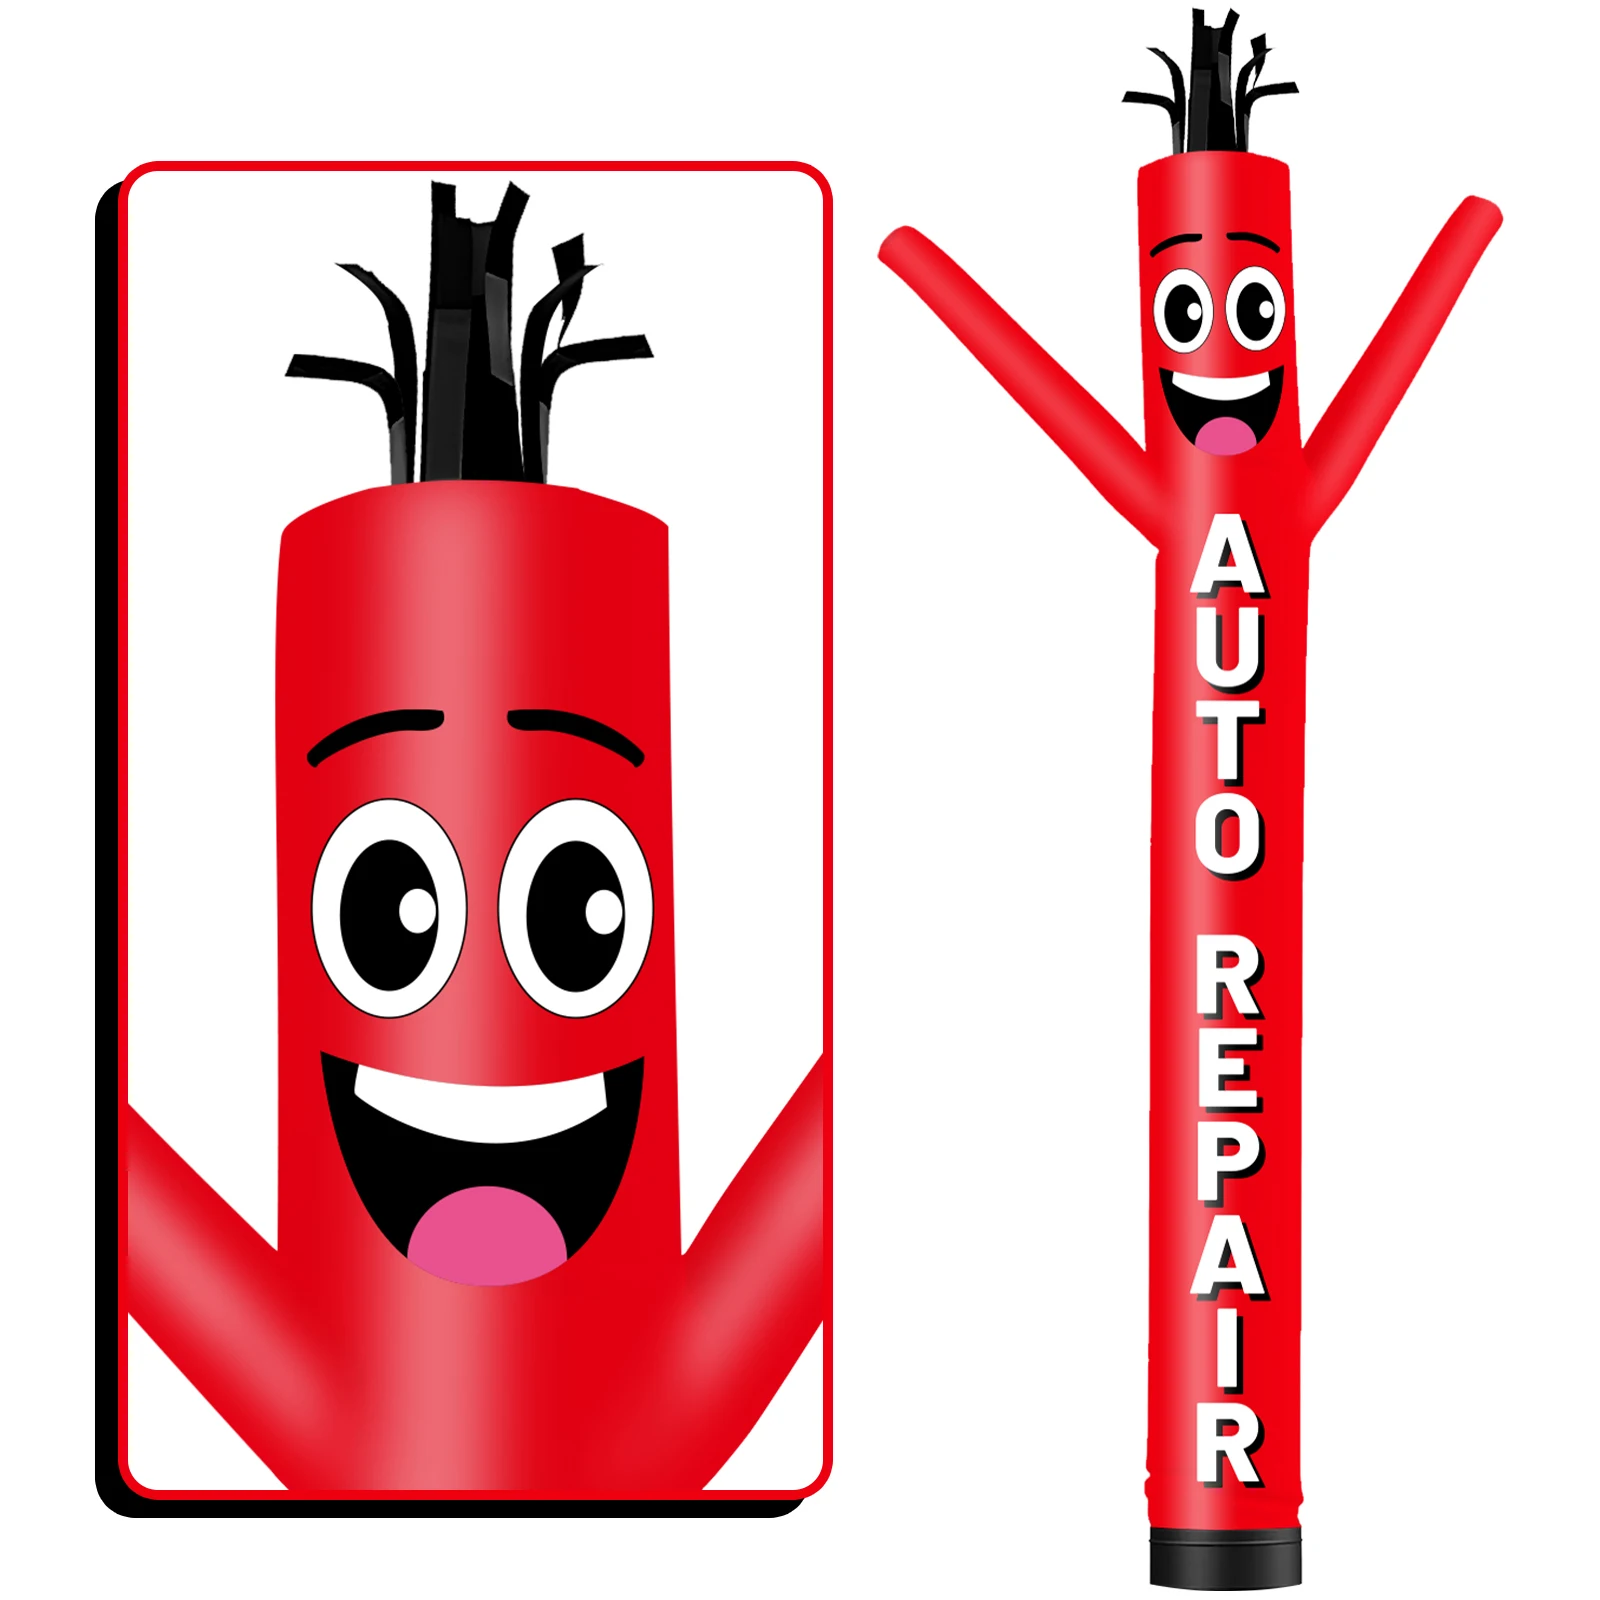 

6/10/15/20FT Tall Inflatable Red Auto Repair Dancing Guy for Outdoor Decoration Advertising(Blower Not Included)